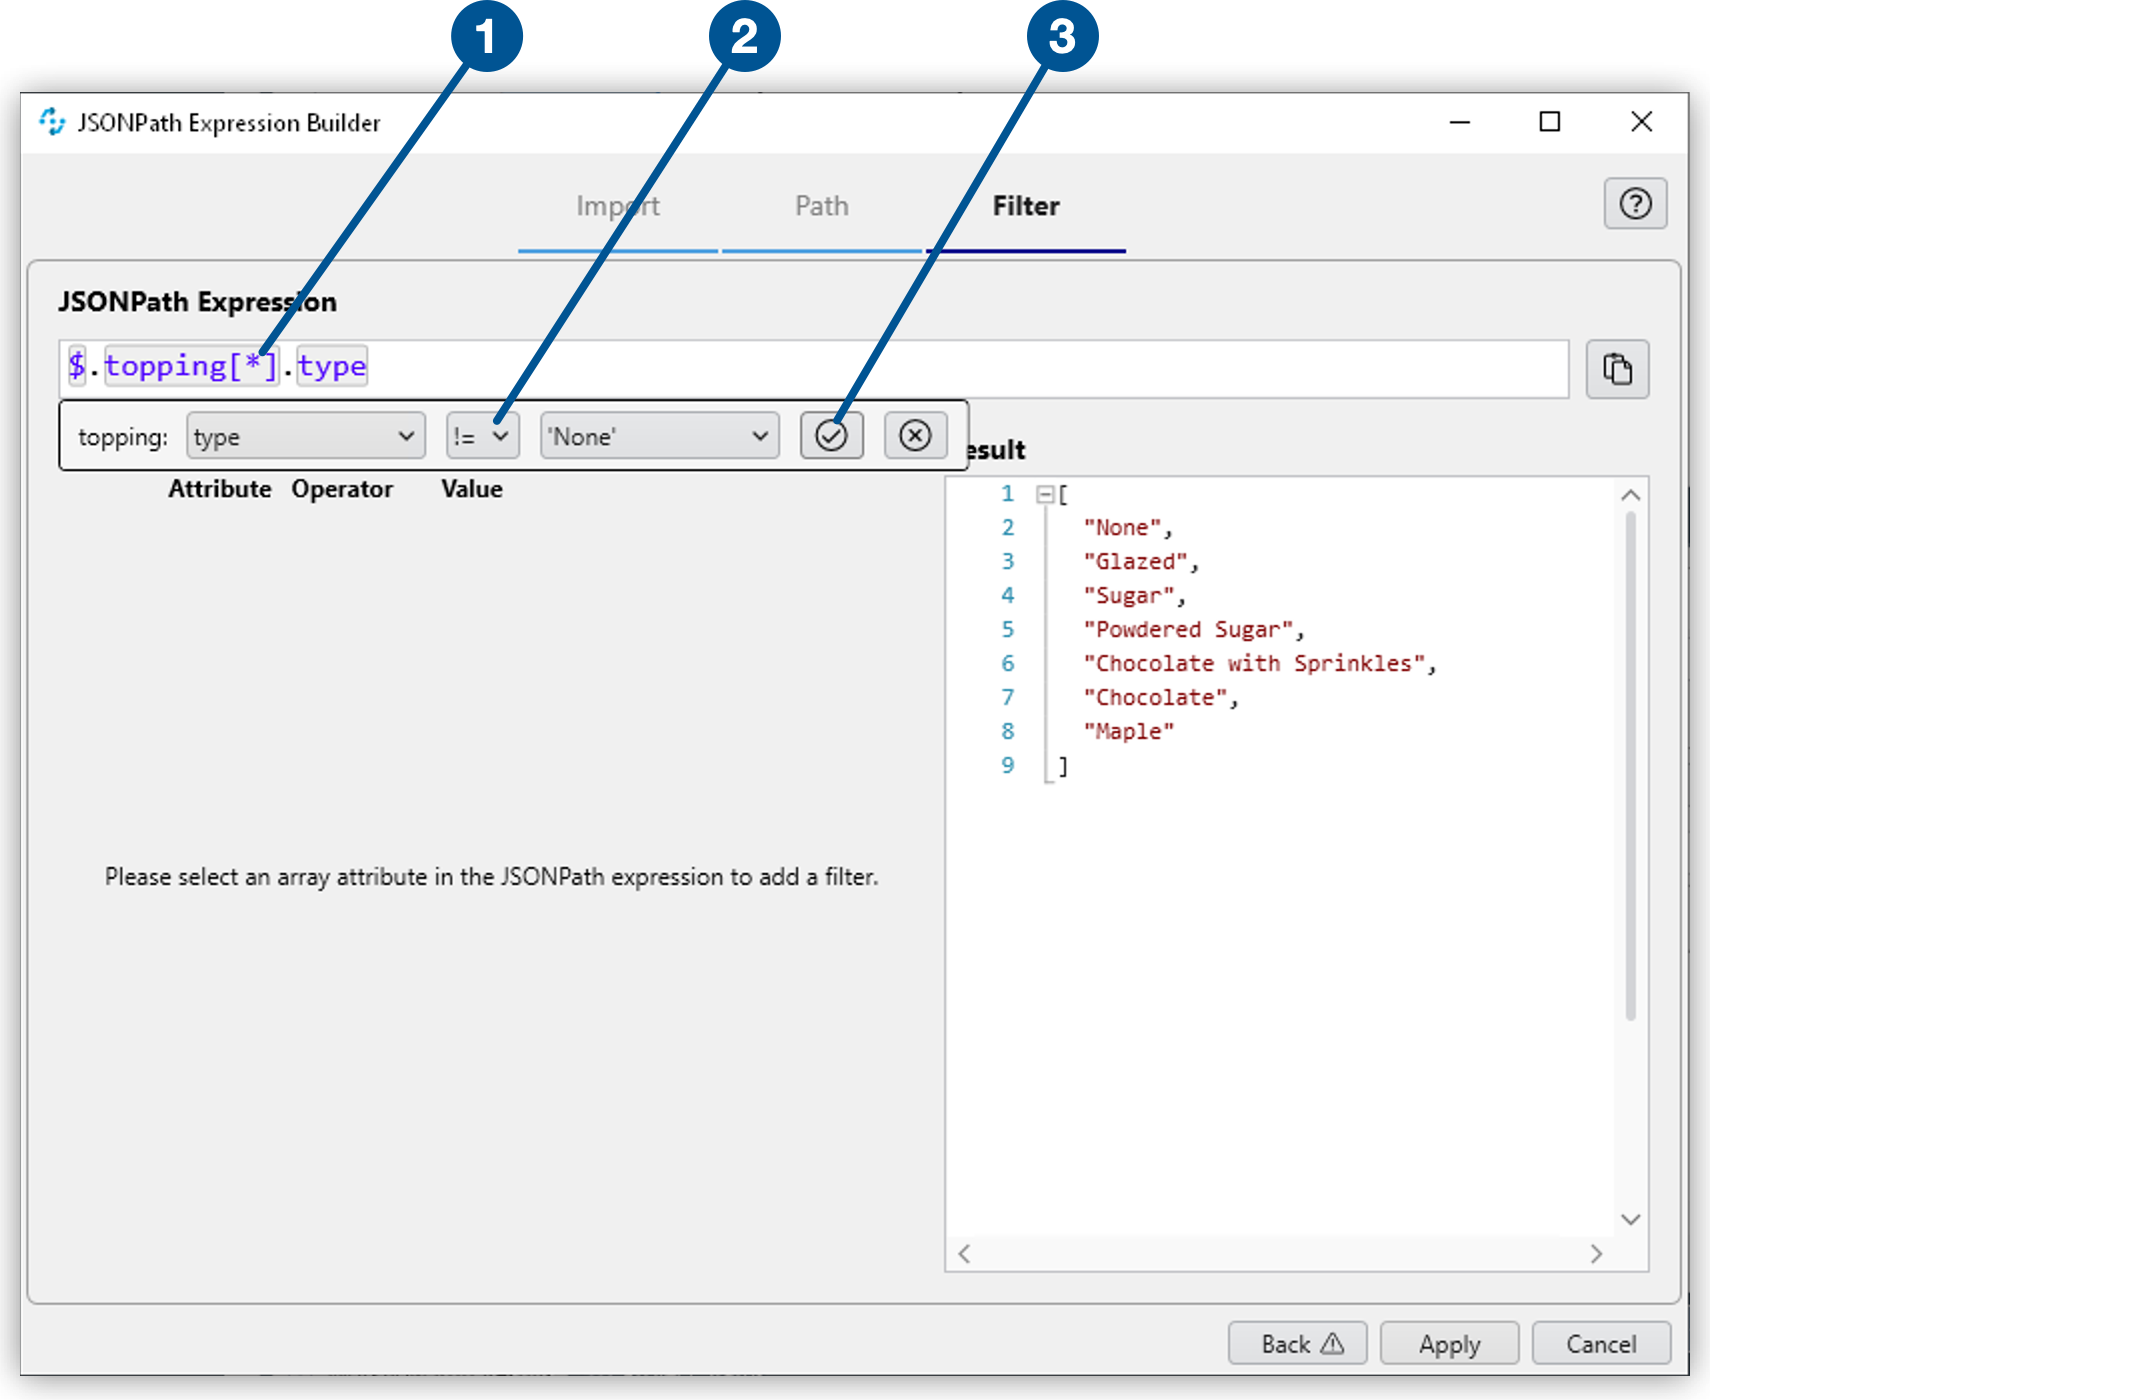 The JSONPath Expression Builder tool showing the filter screen.